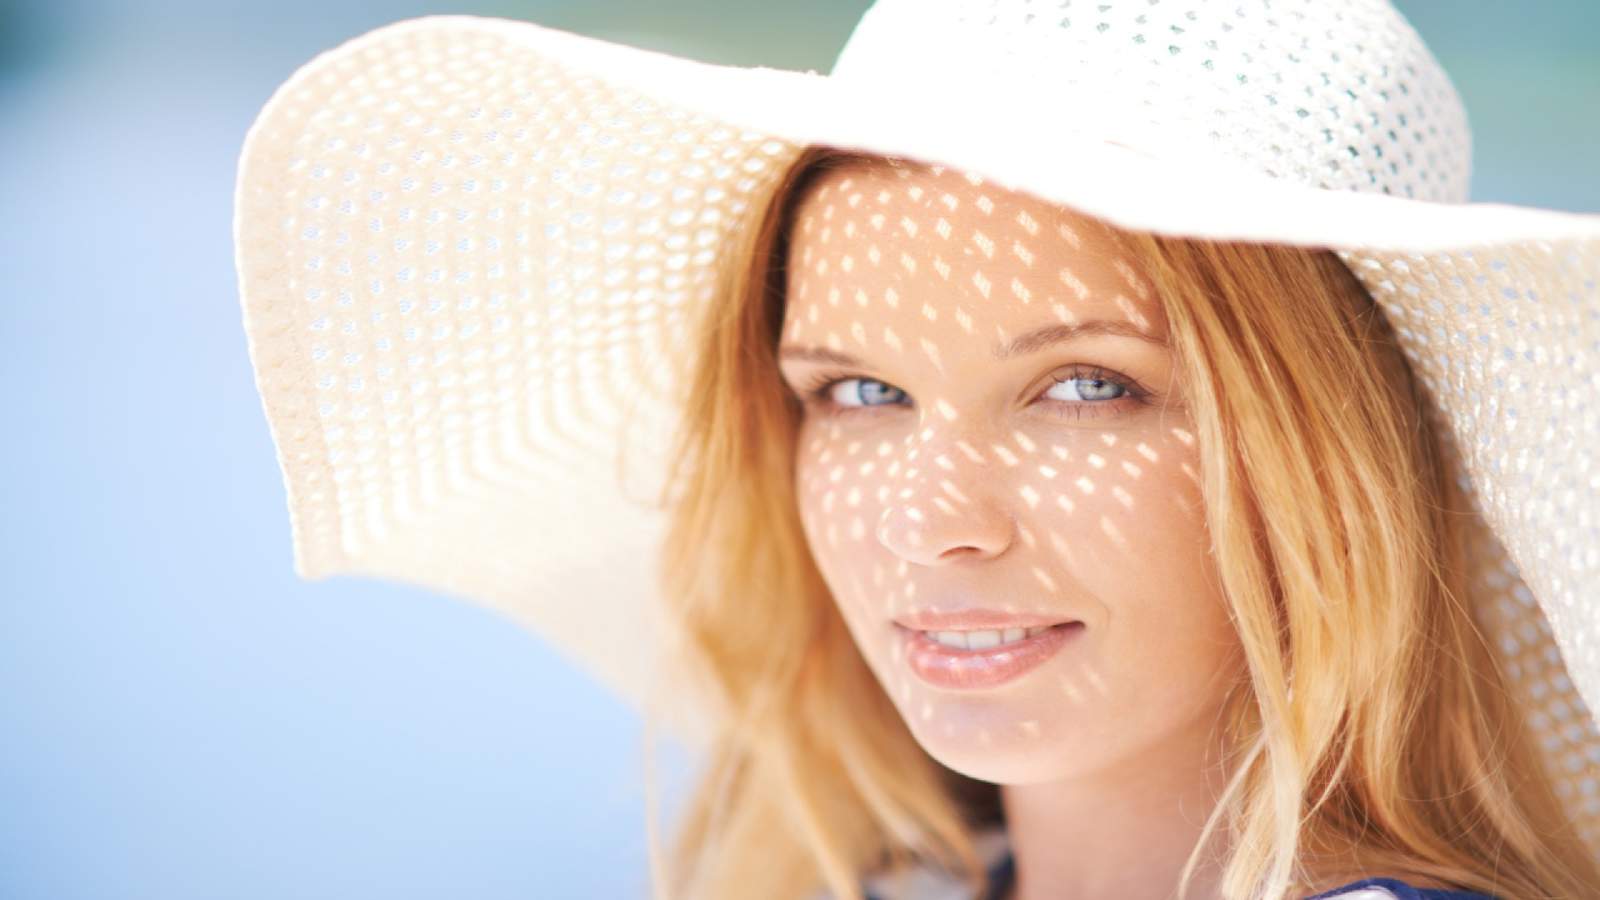 5 ways to keep your skin looking youthful during heat, sun of summer